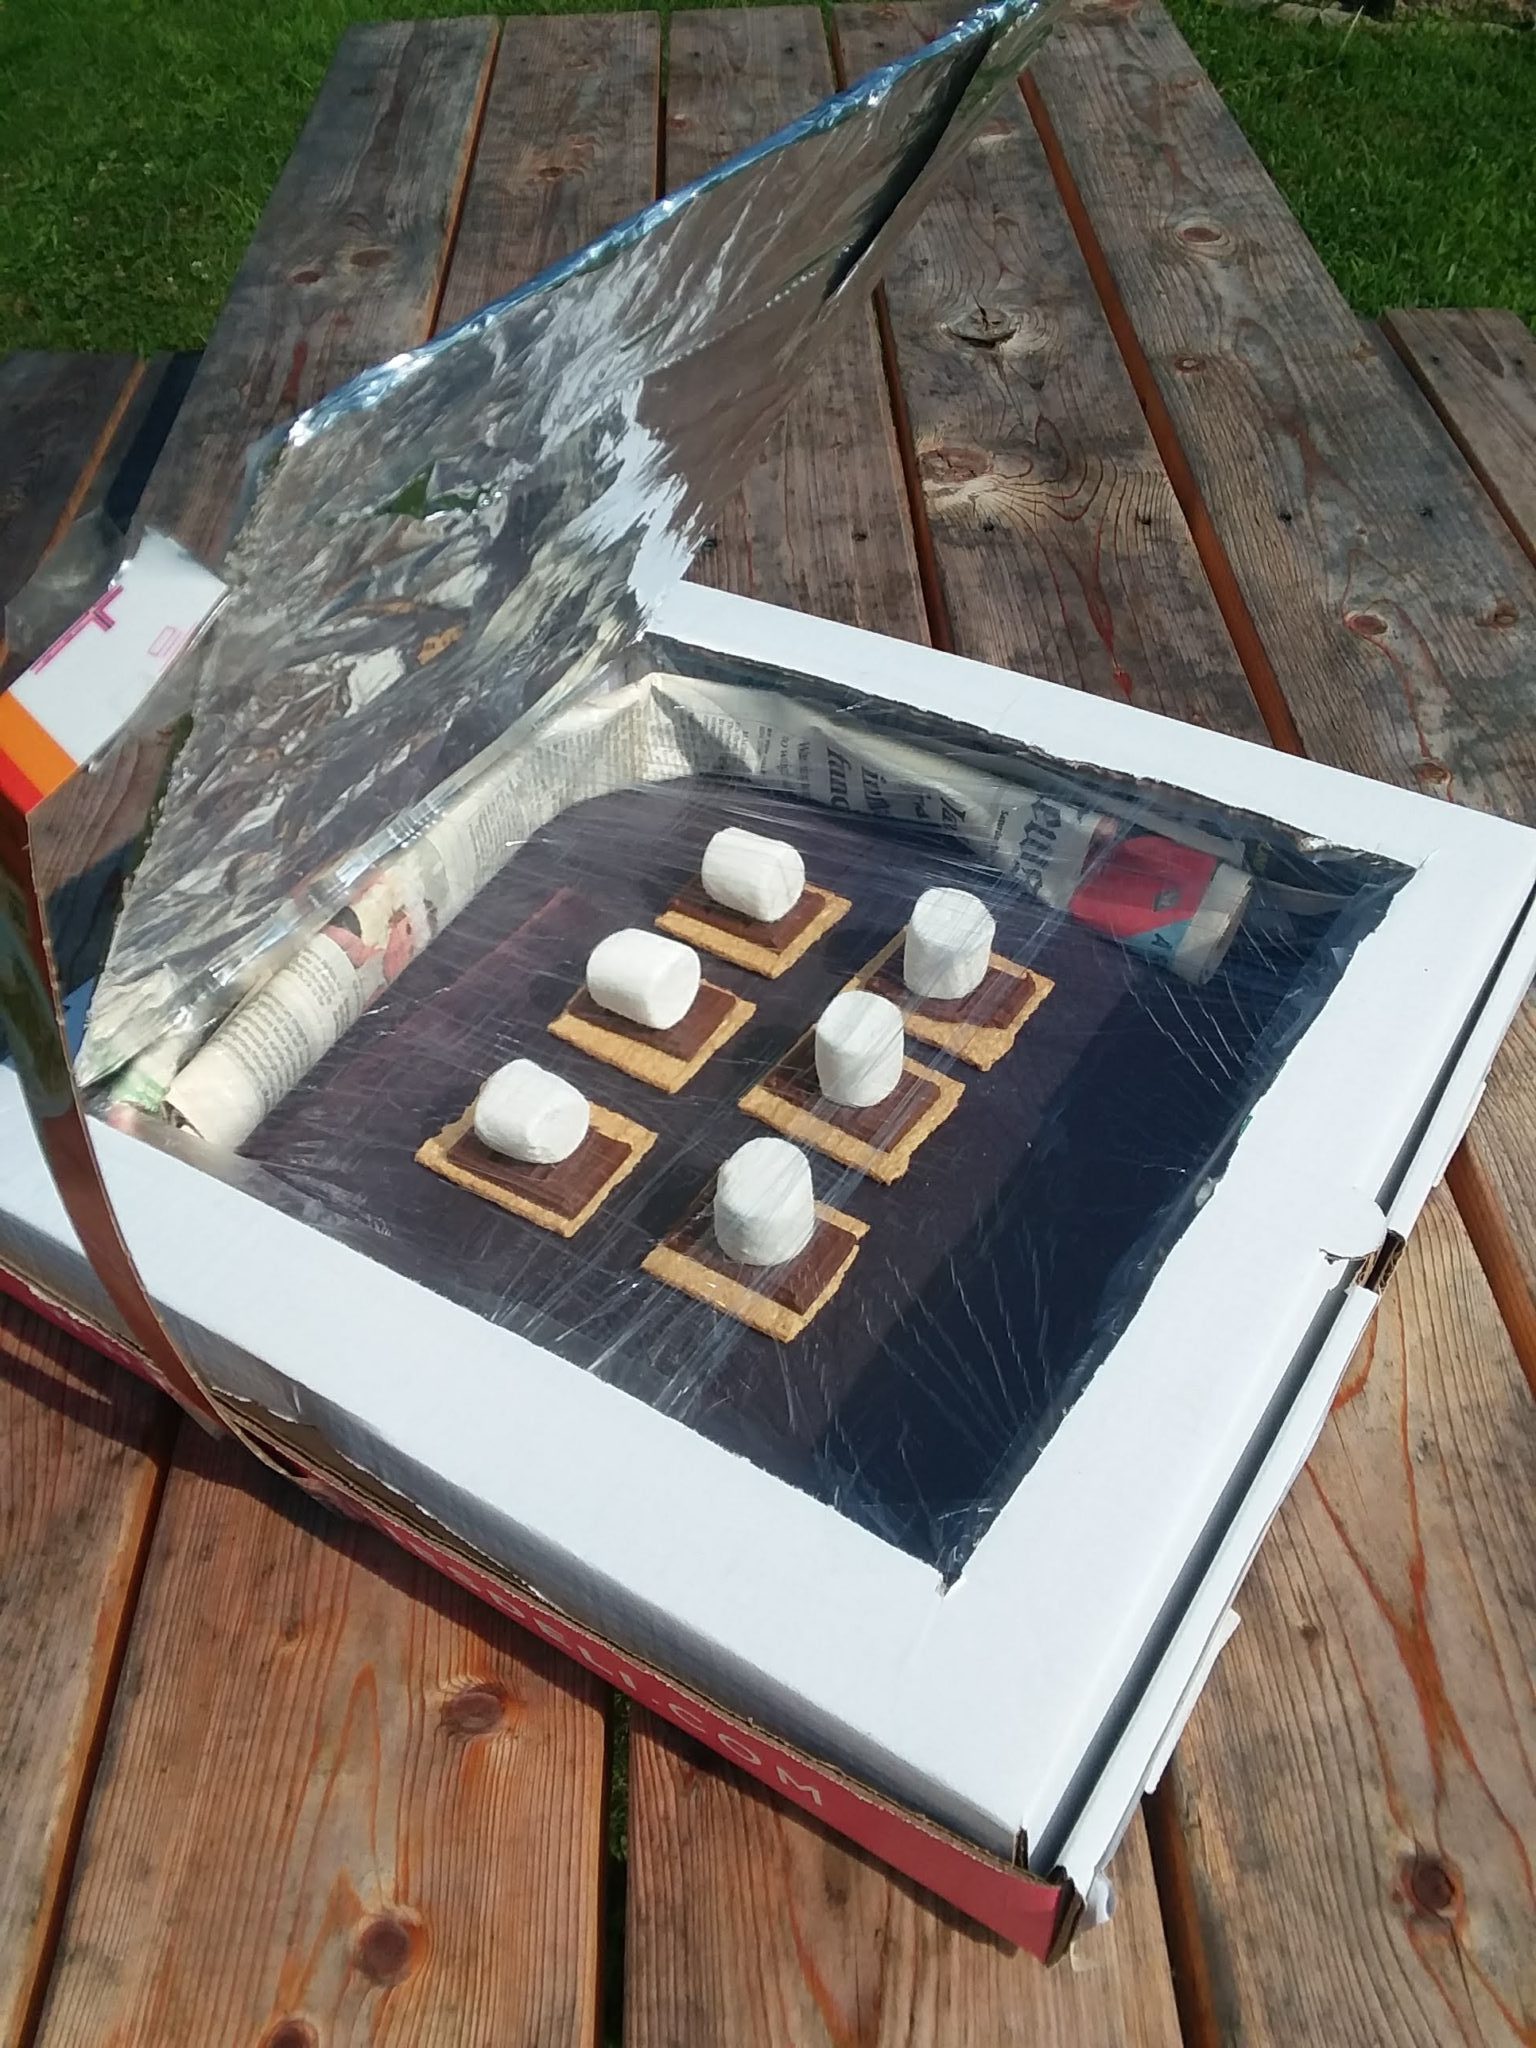 solar oven with kids, a fun chocolate activity to do with kids